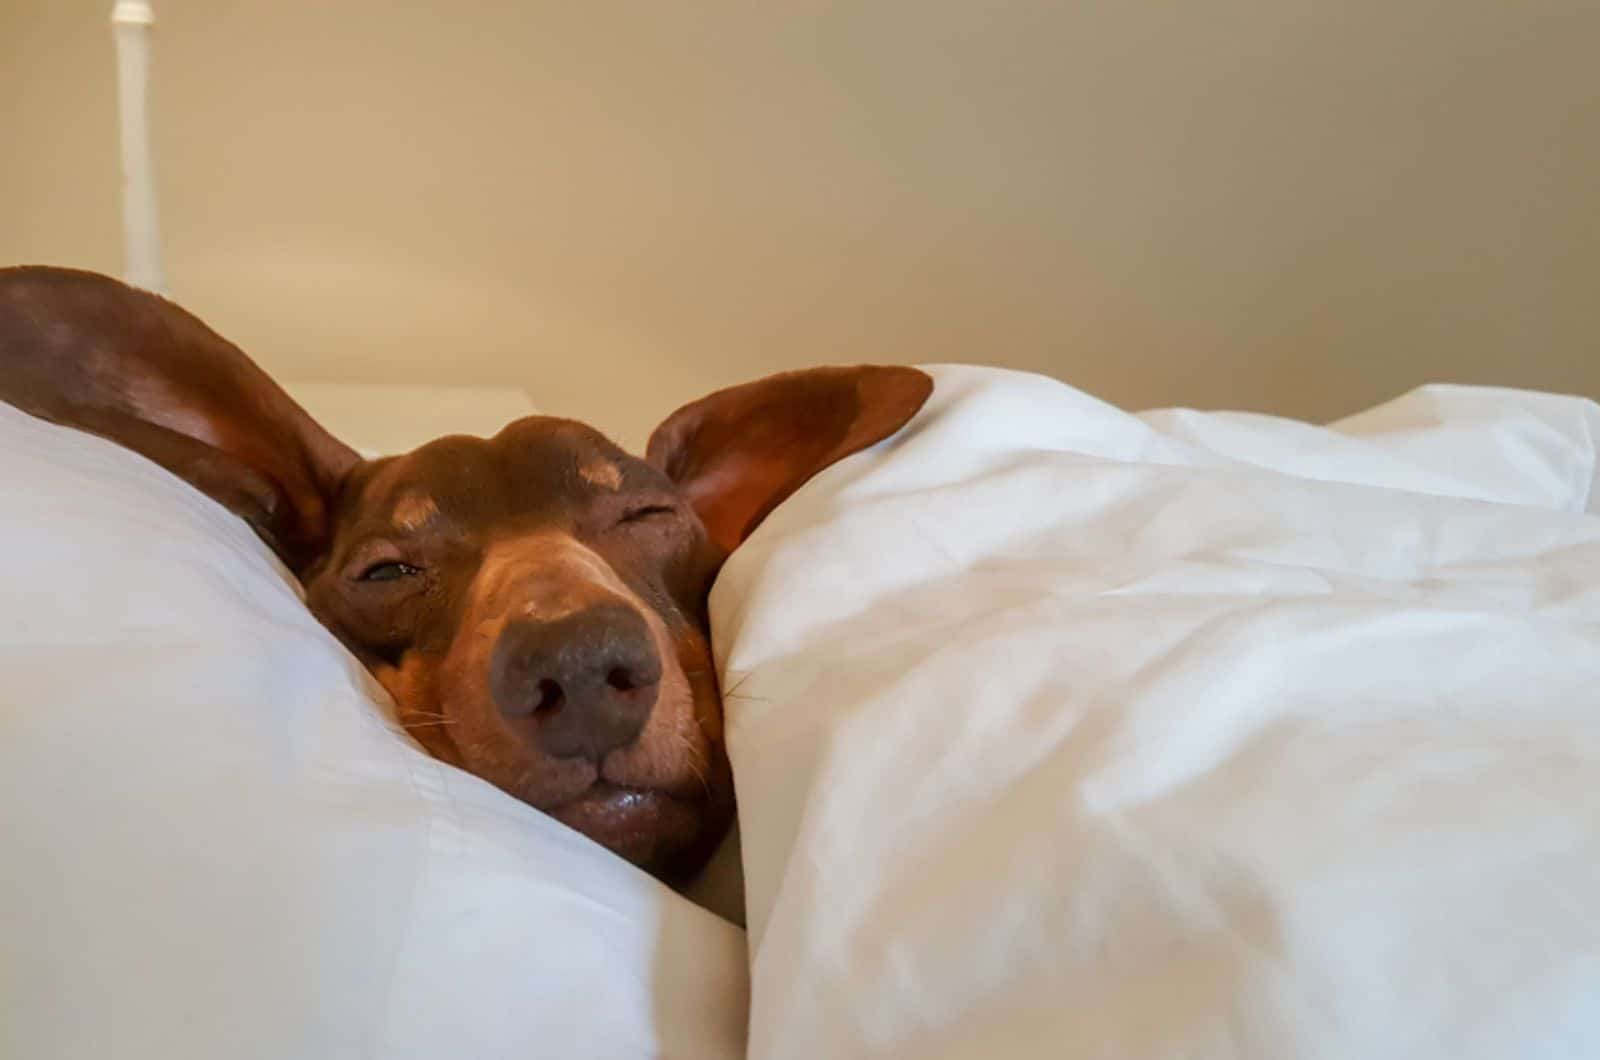 dachshund dog sleeping in the bed with his eyes open